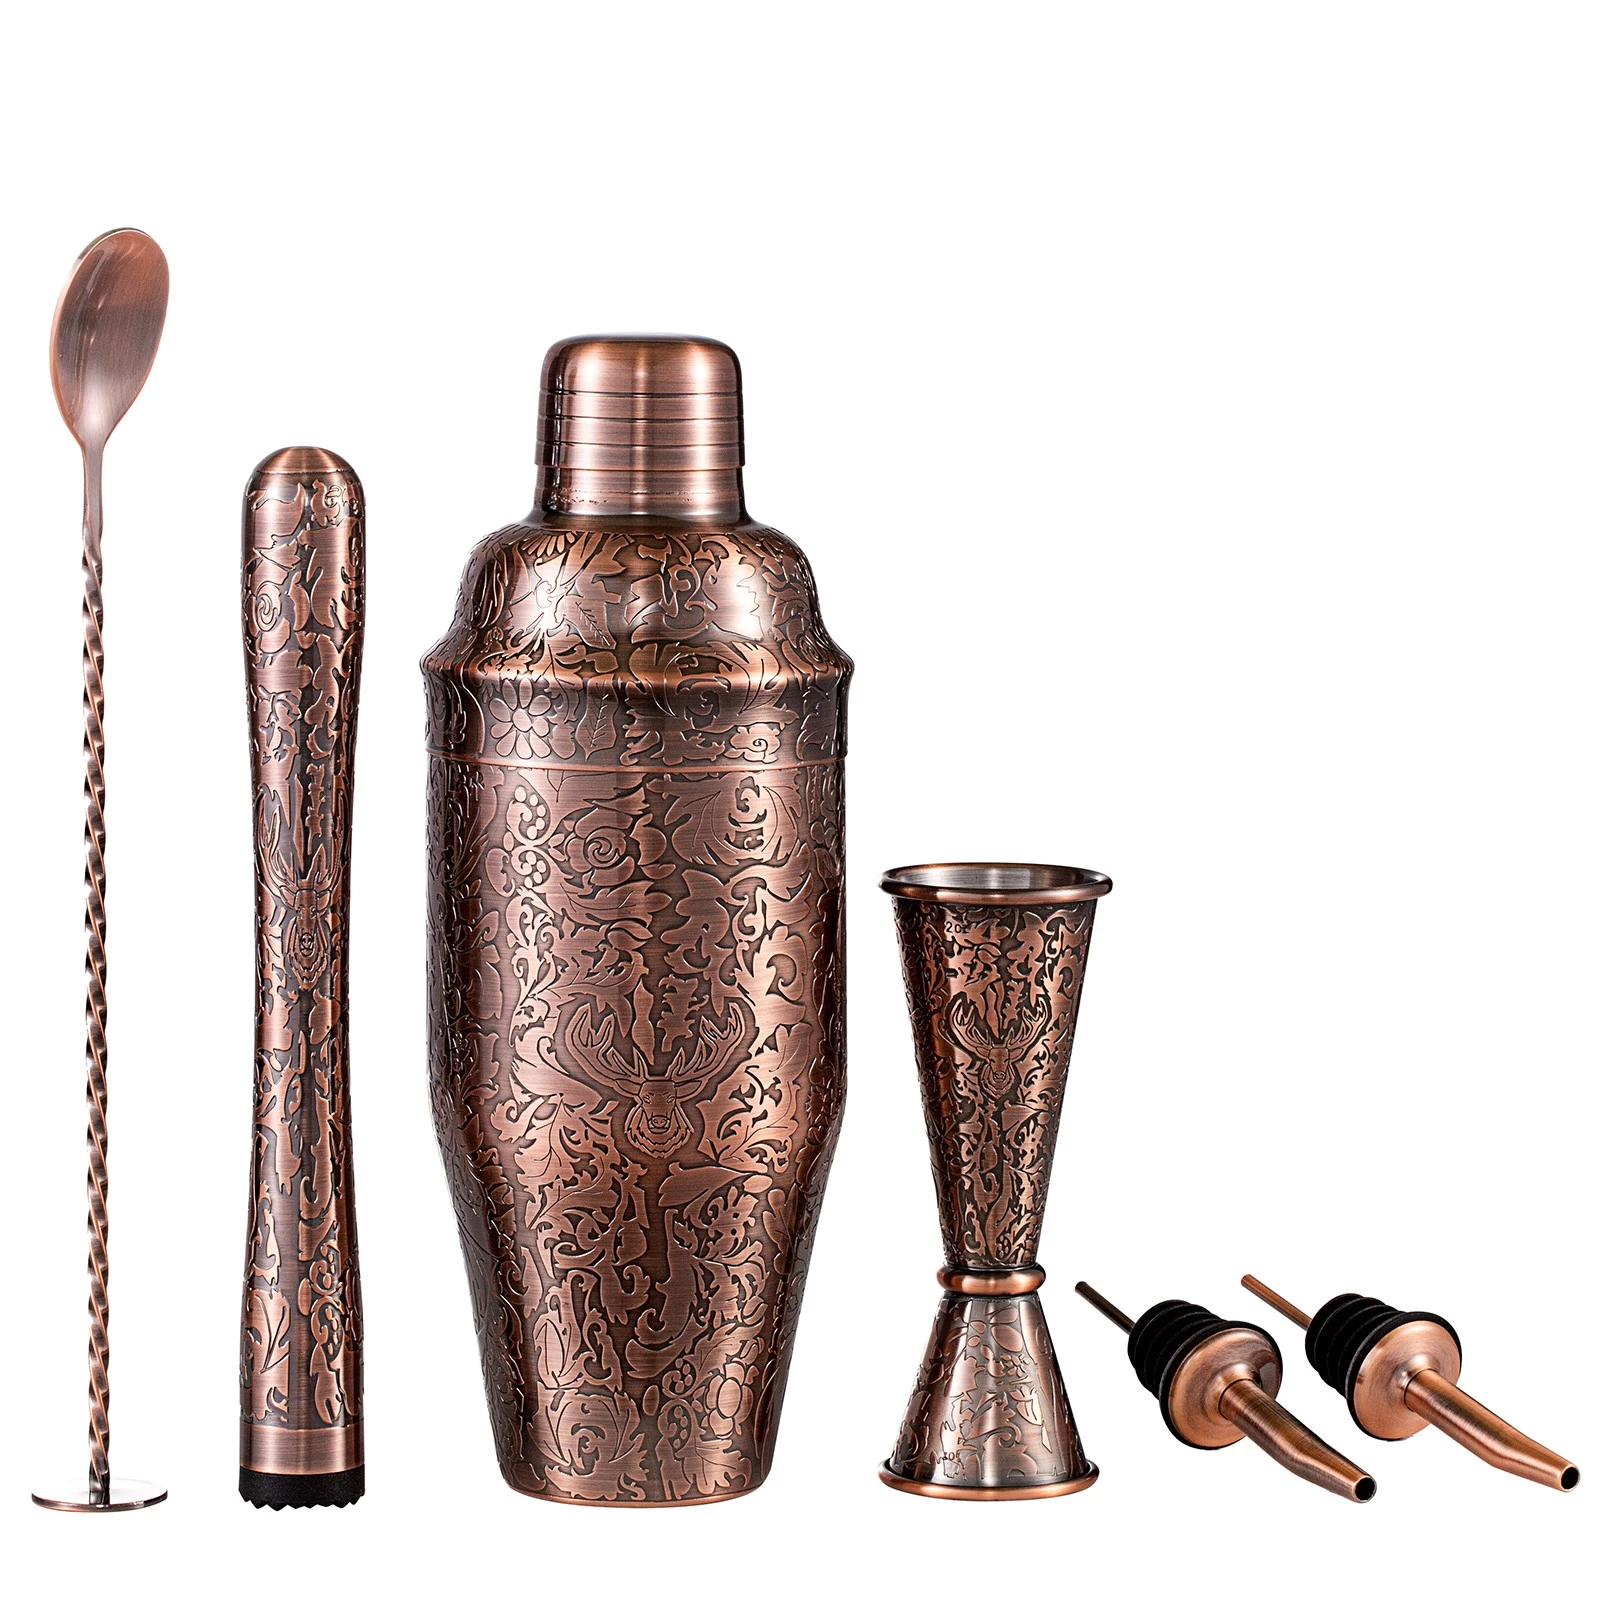 China stainless steel etched deer head bartender set supplier,stainless steel bar tools factory